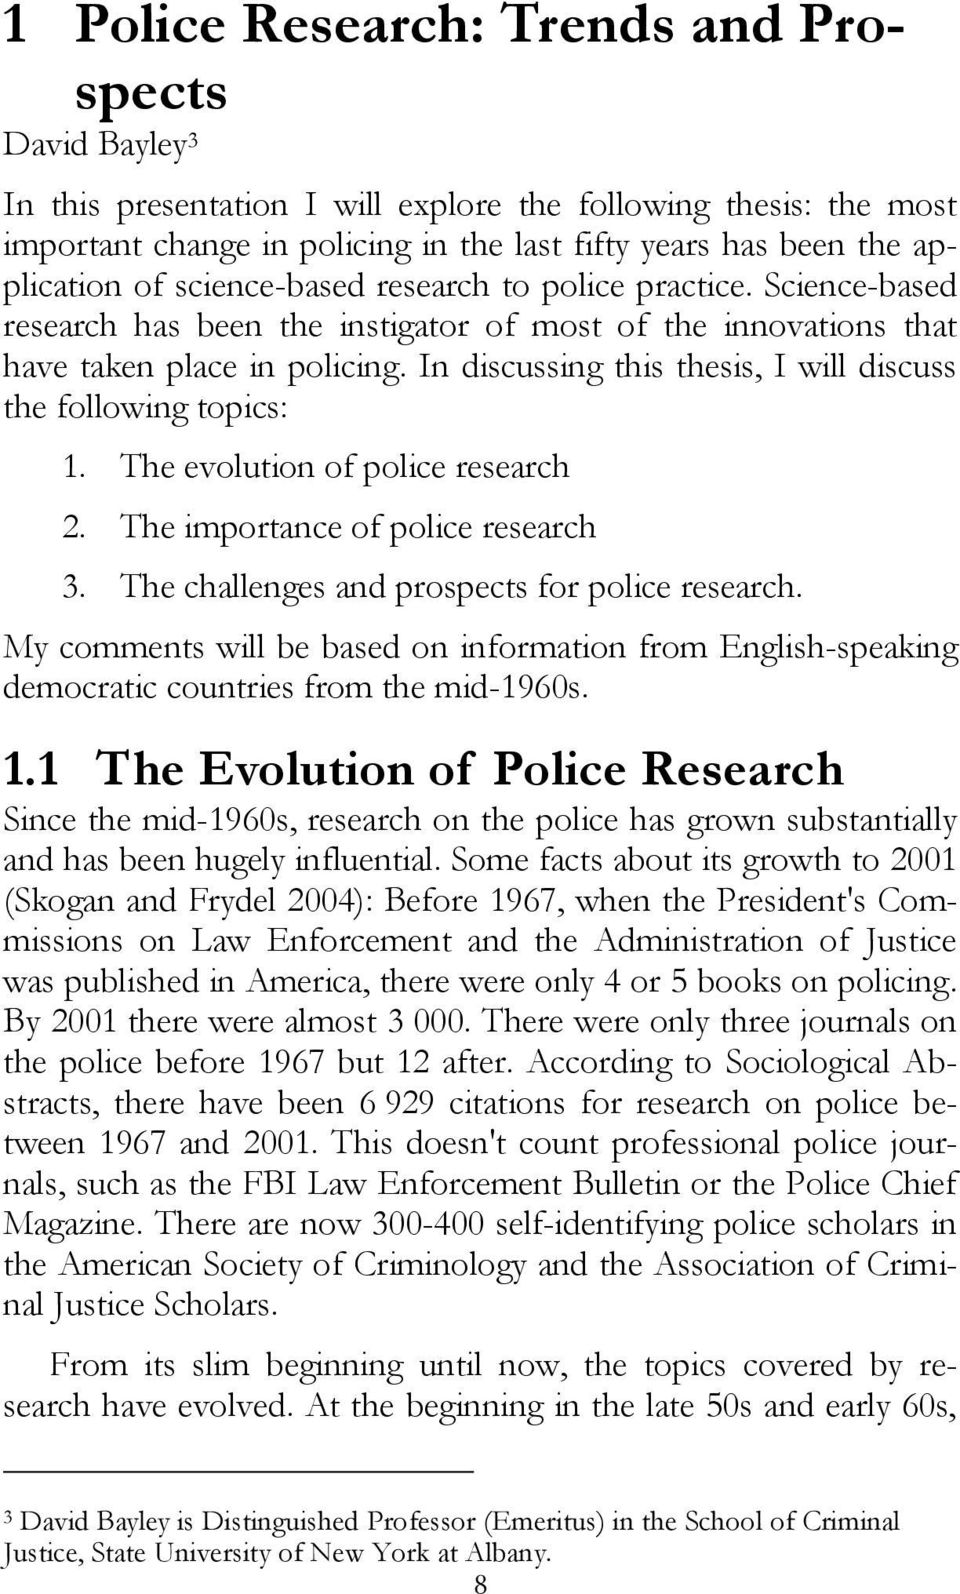 In discussing this thesis, I will discuss the following topics: 1. The evolution of police research 2. The importance of police research 3. The challenges and prospects for police research.